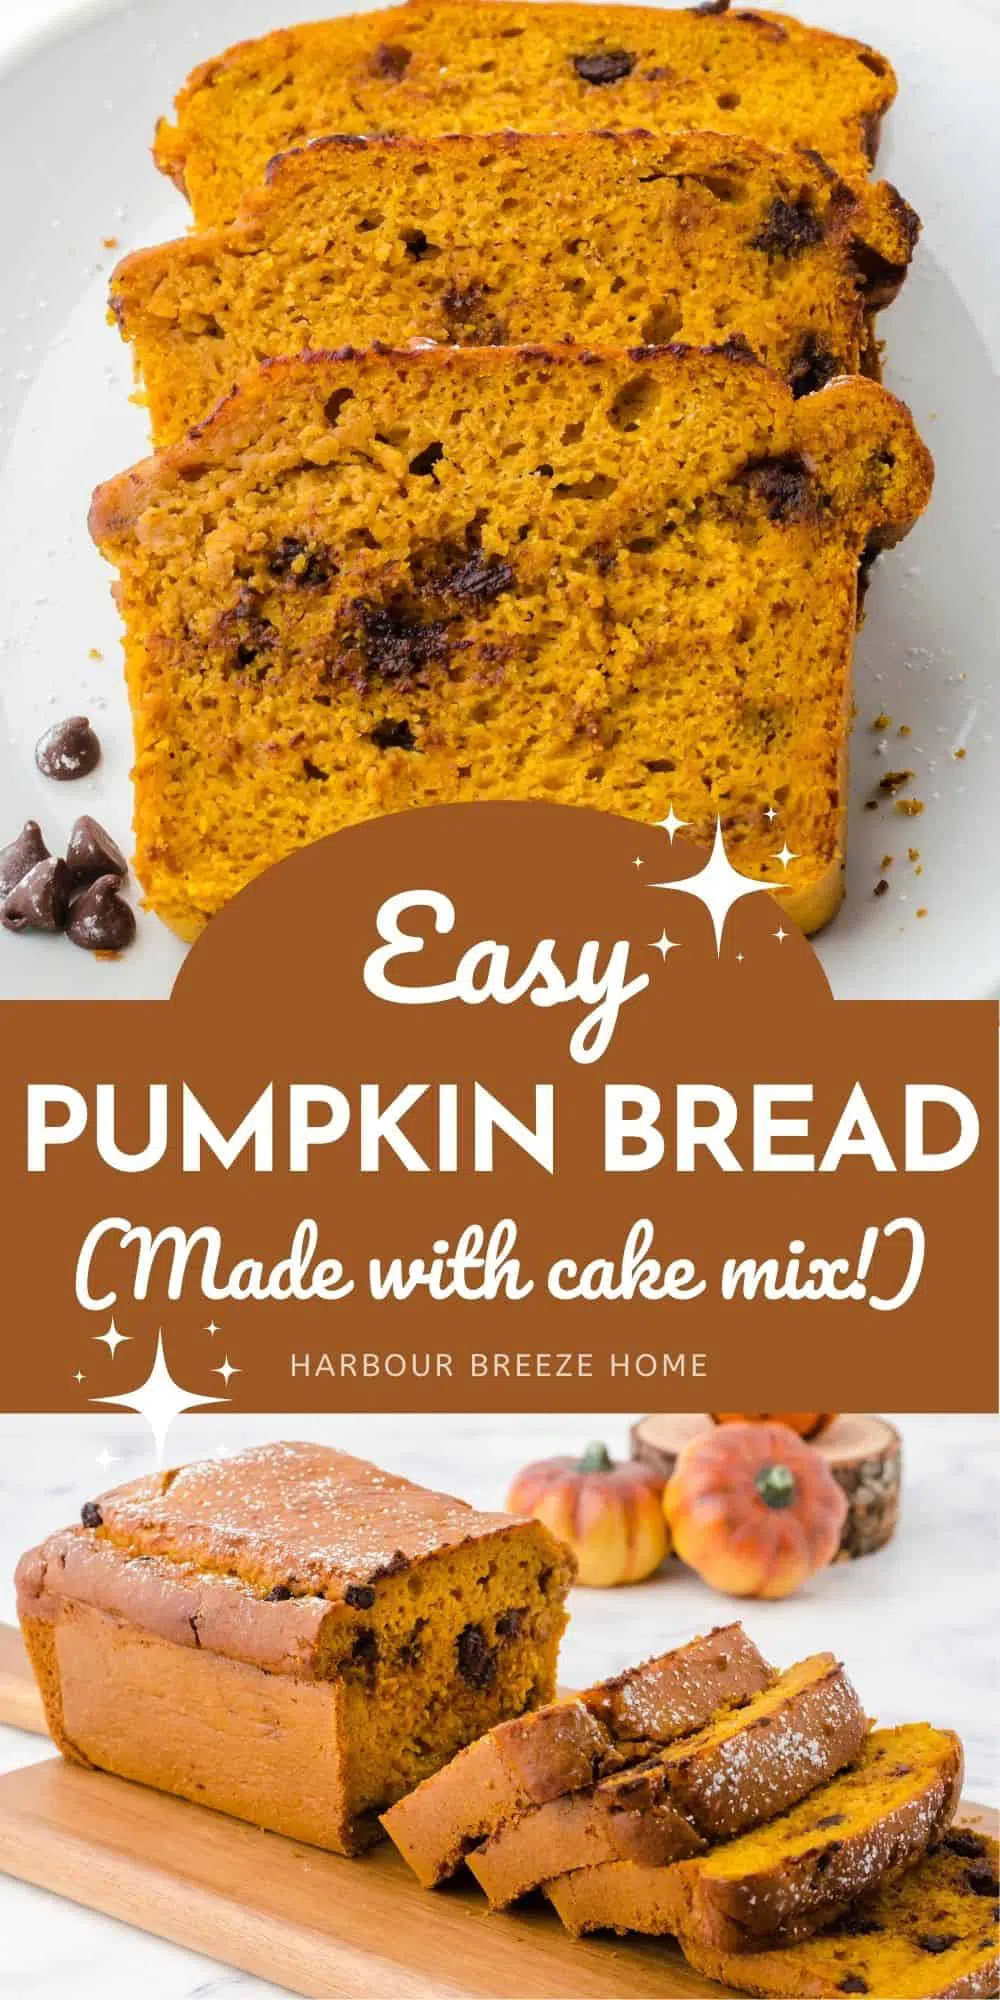 Pumpkin Bread made with yellow cake mix and canned pumpkin